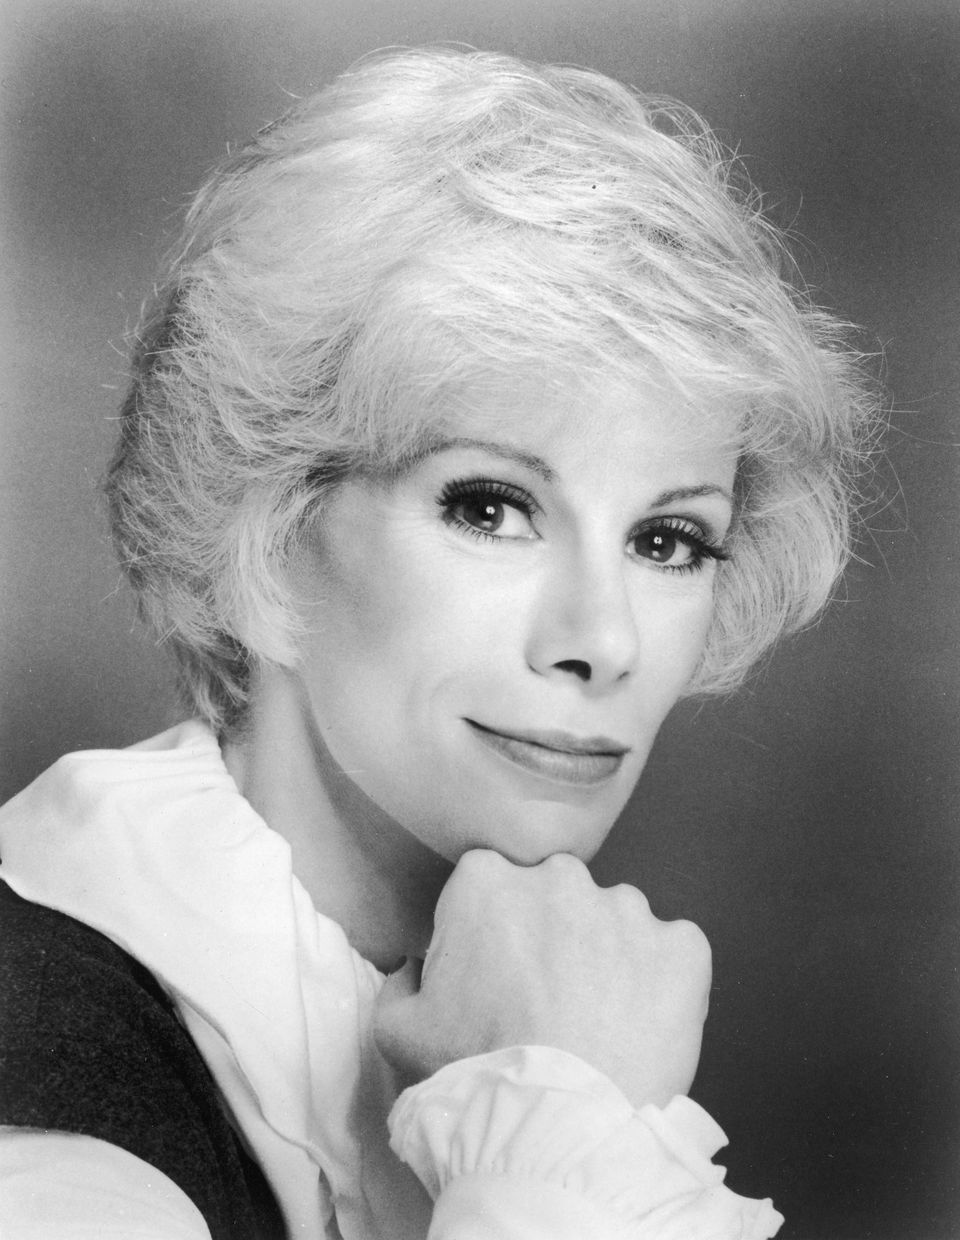 "<a href="http://www.theguardian.com/stage/2012/aug/09/comedy-gold-joan-rivers" role="link" class=" js-entry-link cet-external-link" data-vars-item-name="I hate thin people" data-vars-item-type="text" data-vars-unit-name="5bb47b73e4b066f8d259d18b" data-vars-unit-type="buzz_body" data-vars-target-content-id="http://www.theguardian.com/stage/2012/aug/09/comedy-gold-joan-rivers" data-vars-target-content-type="url" data-vars-type="web_external_link" data-vars-subunit-name="before_you_go_slideshow" data-vars-subunit-type="component" data-vars-position-in-subunit="0">I hate thin people</a>; 'Oh, does the tampon make me look fat?'"